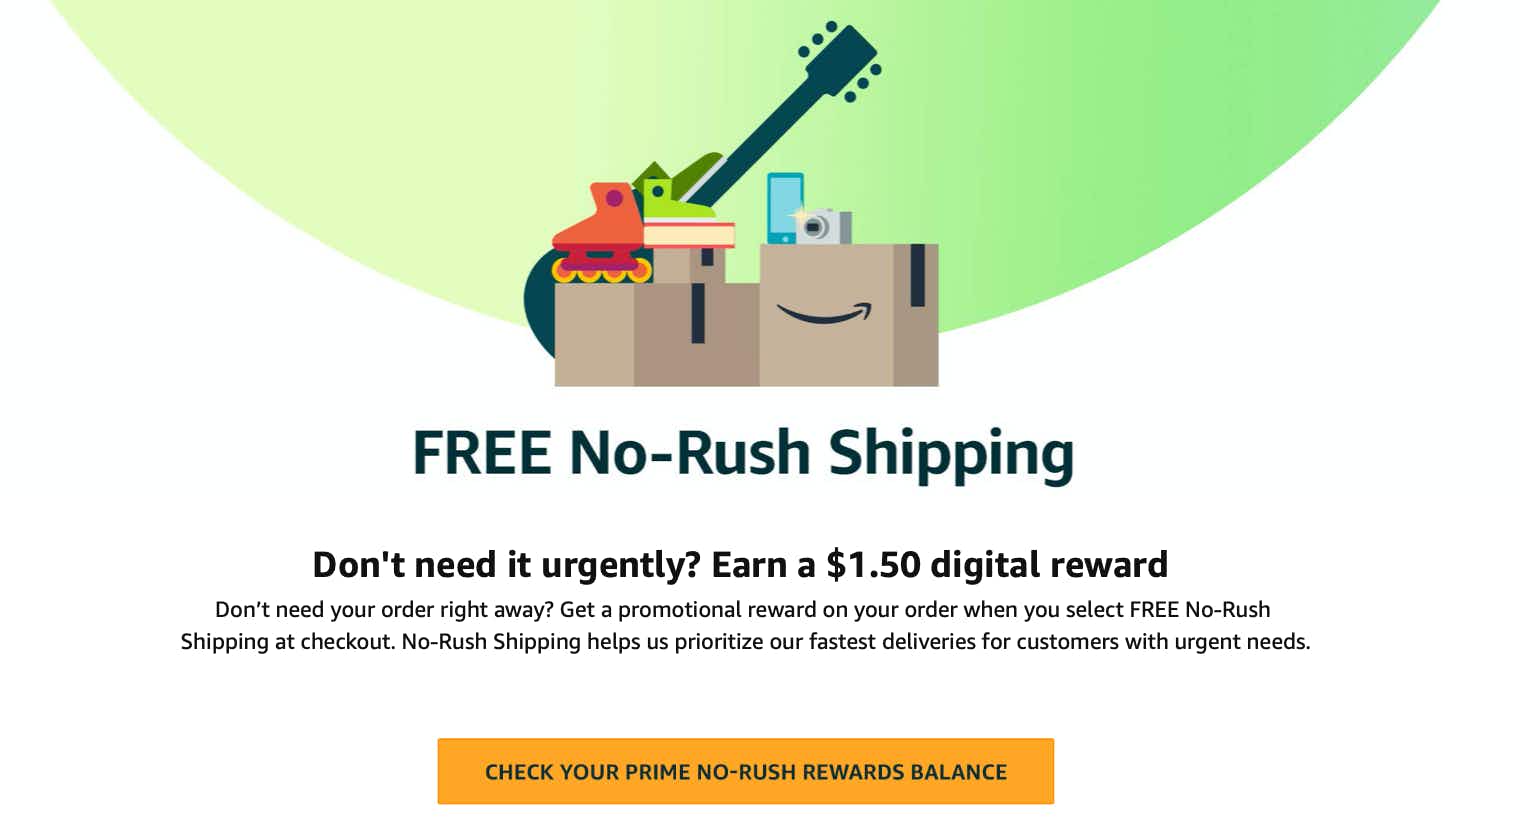 https://prod-cdn-thekrazycouponlady.imgix.net/wp-content/uploads/2020/03/amazon-no-rush-shipping-credit-1584740446-1584740446.png?auto=format&fit=fill&q=25